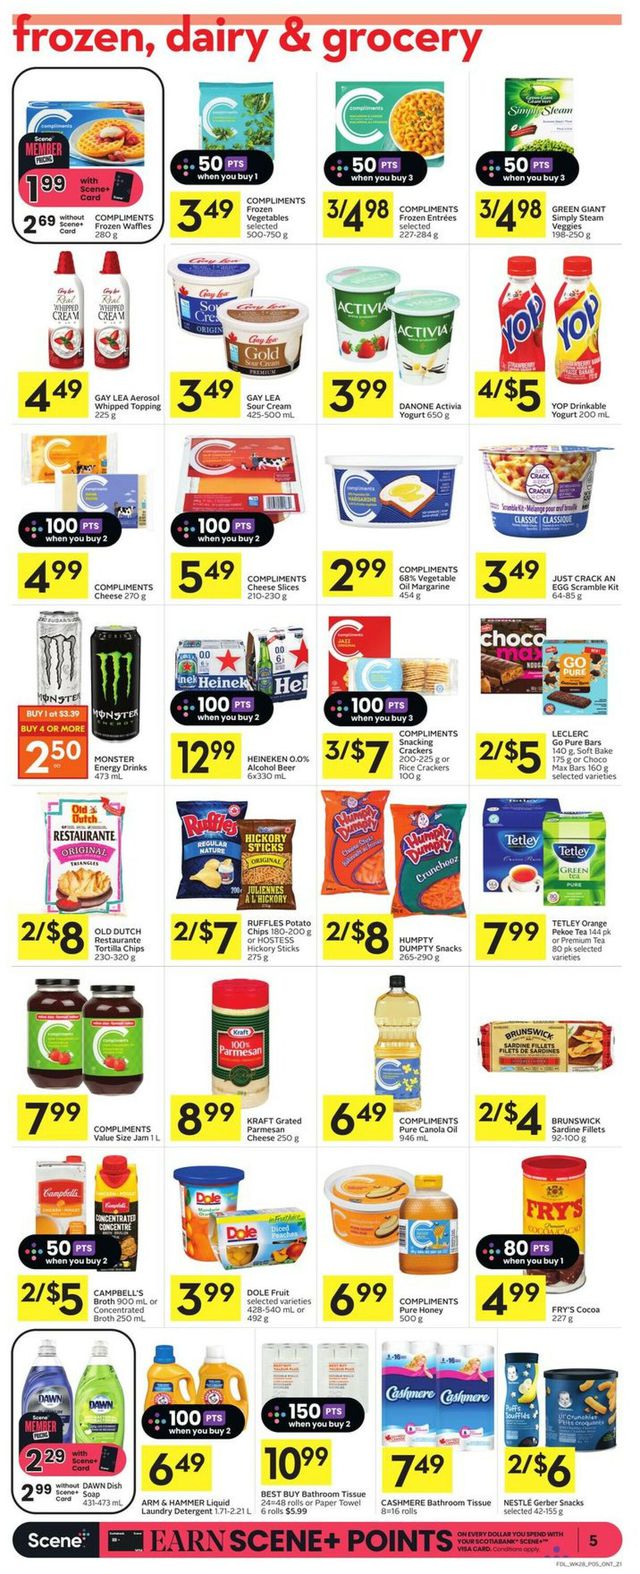 Foodland Flyer from 11/10/2022